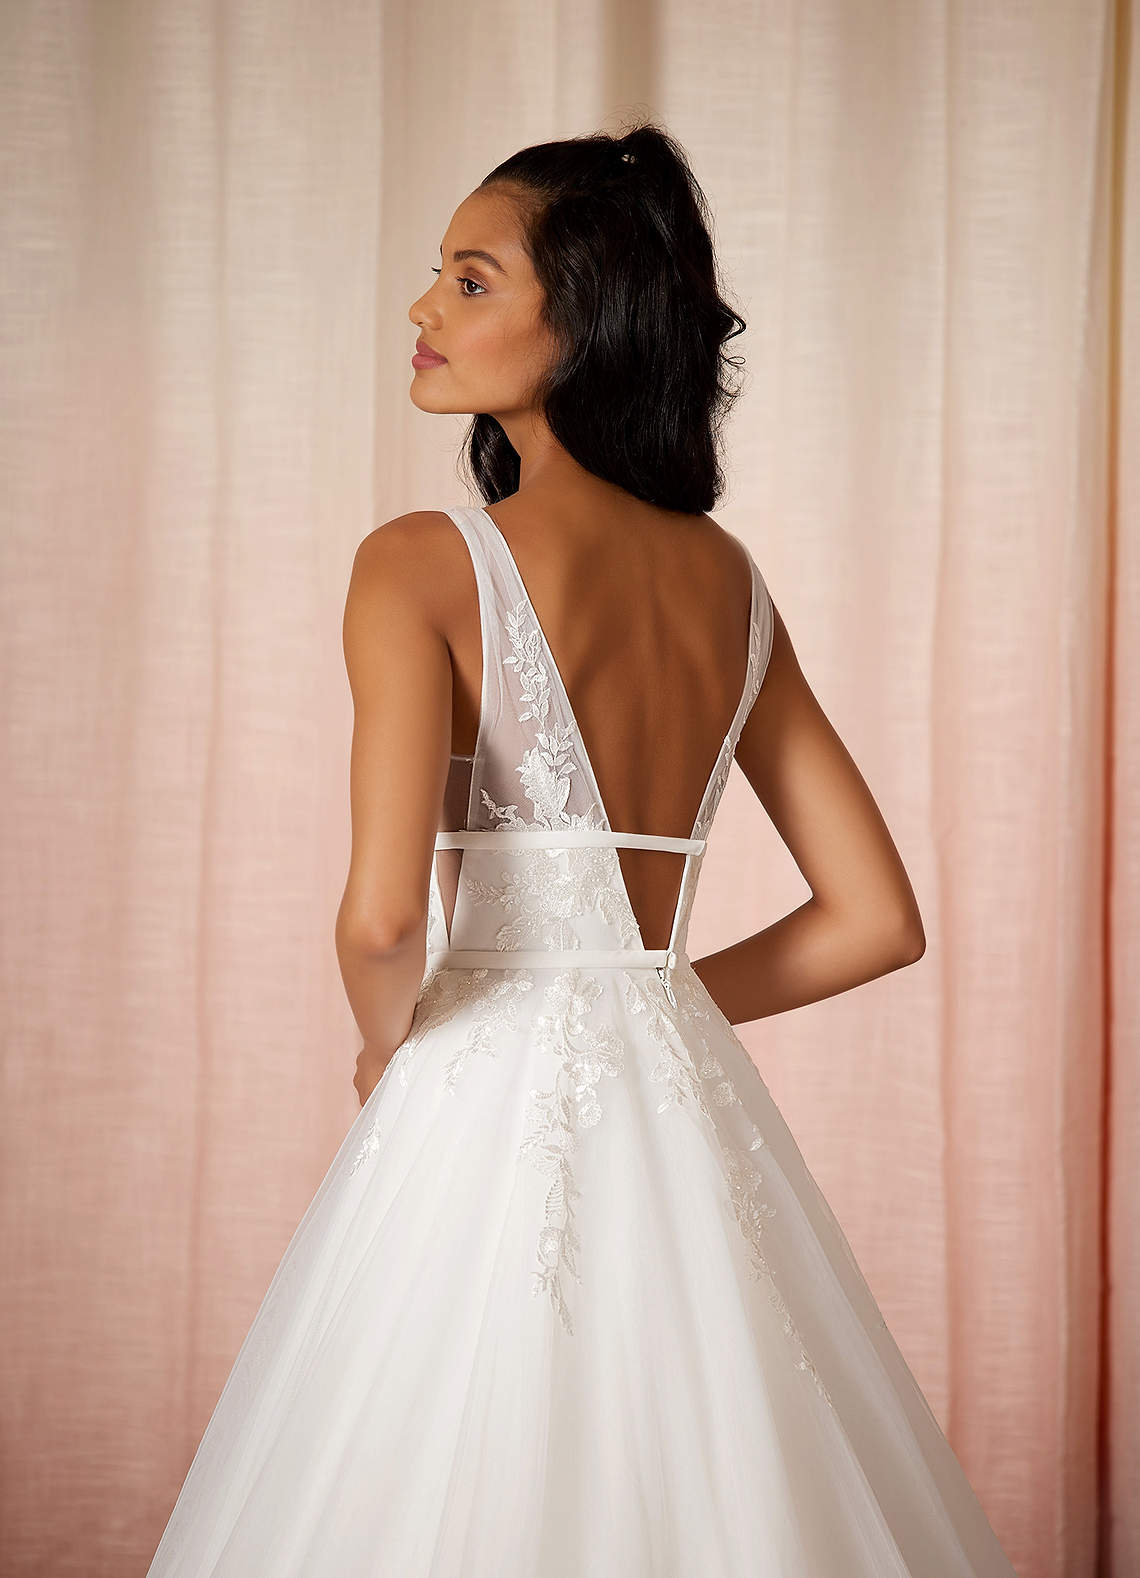 Azazie Lafayette Wedding Dresses A-Line Lace Tulle Cathedral Train Dress image1